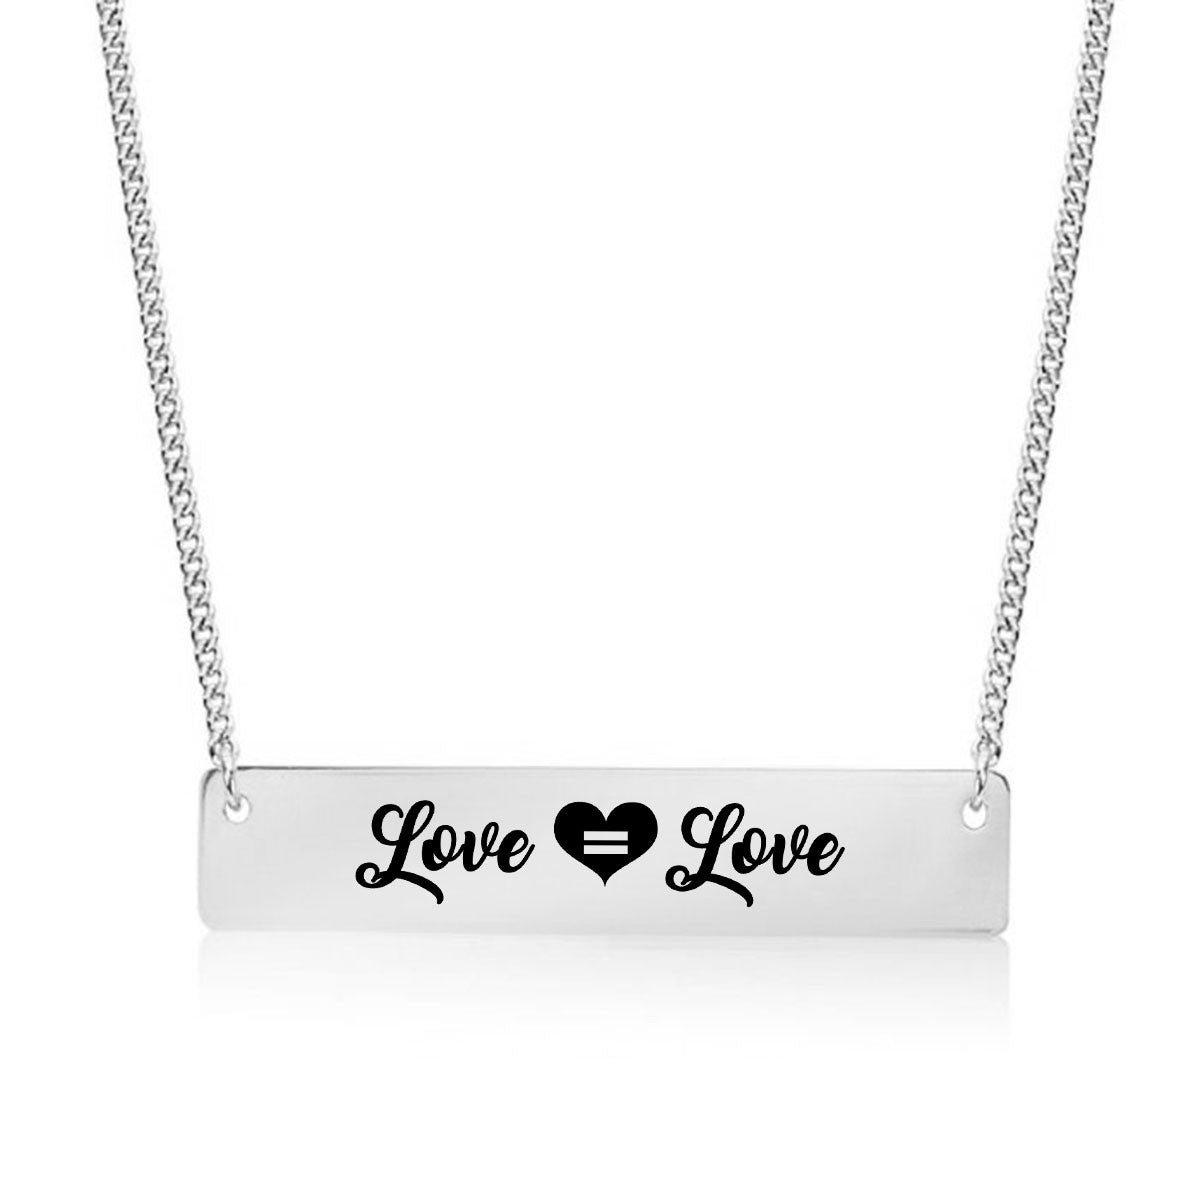 Love is Love Gold / Silver Bar Necklace - pipercleo.com